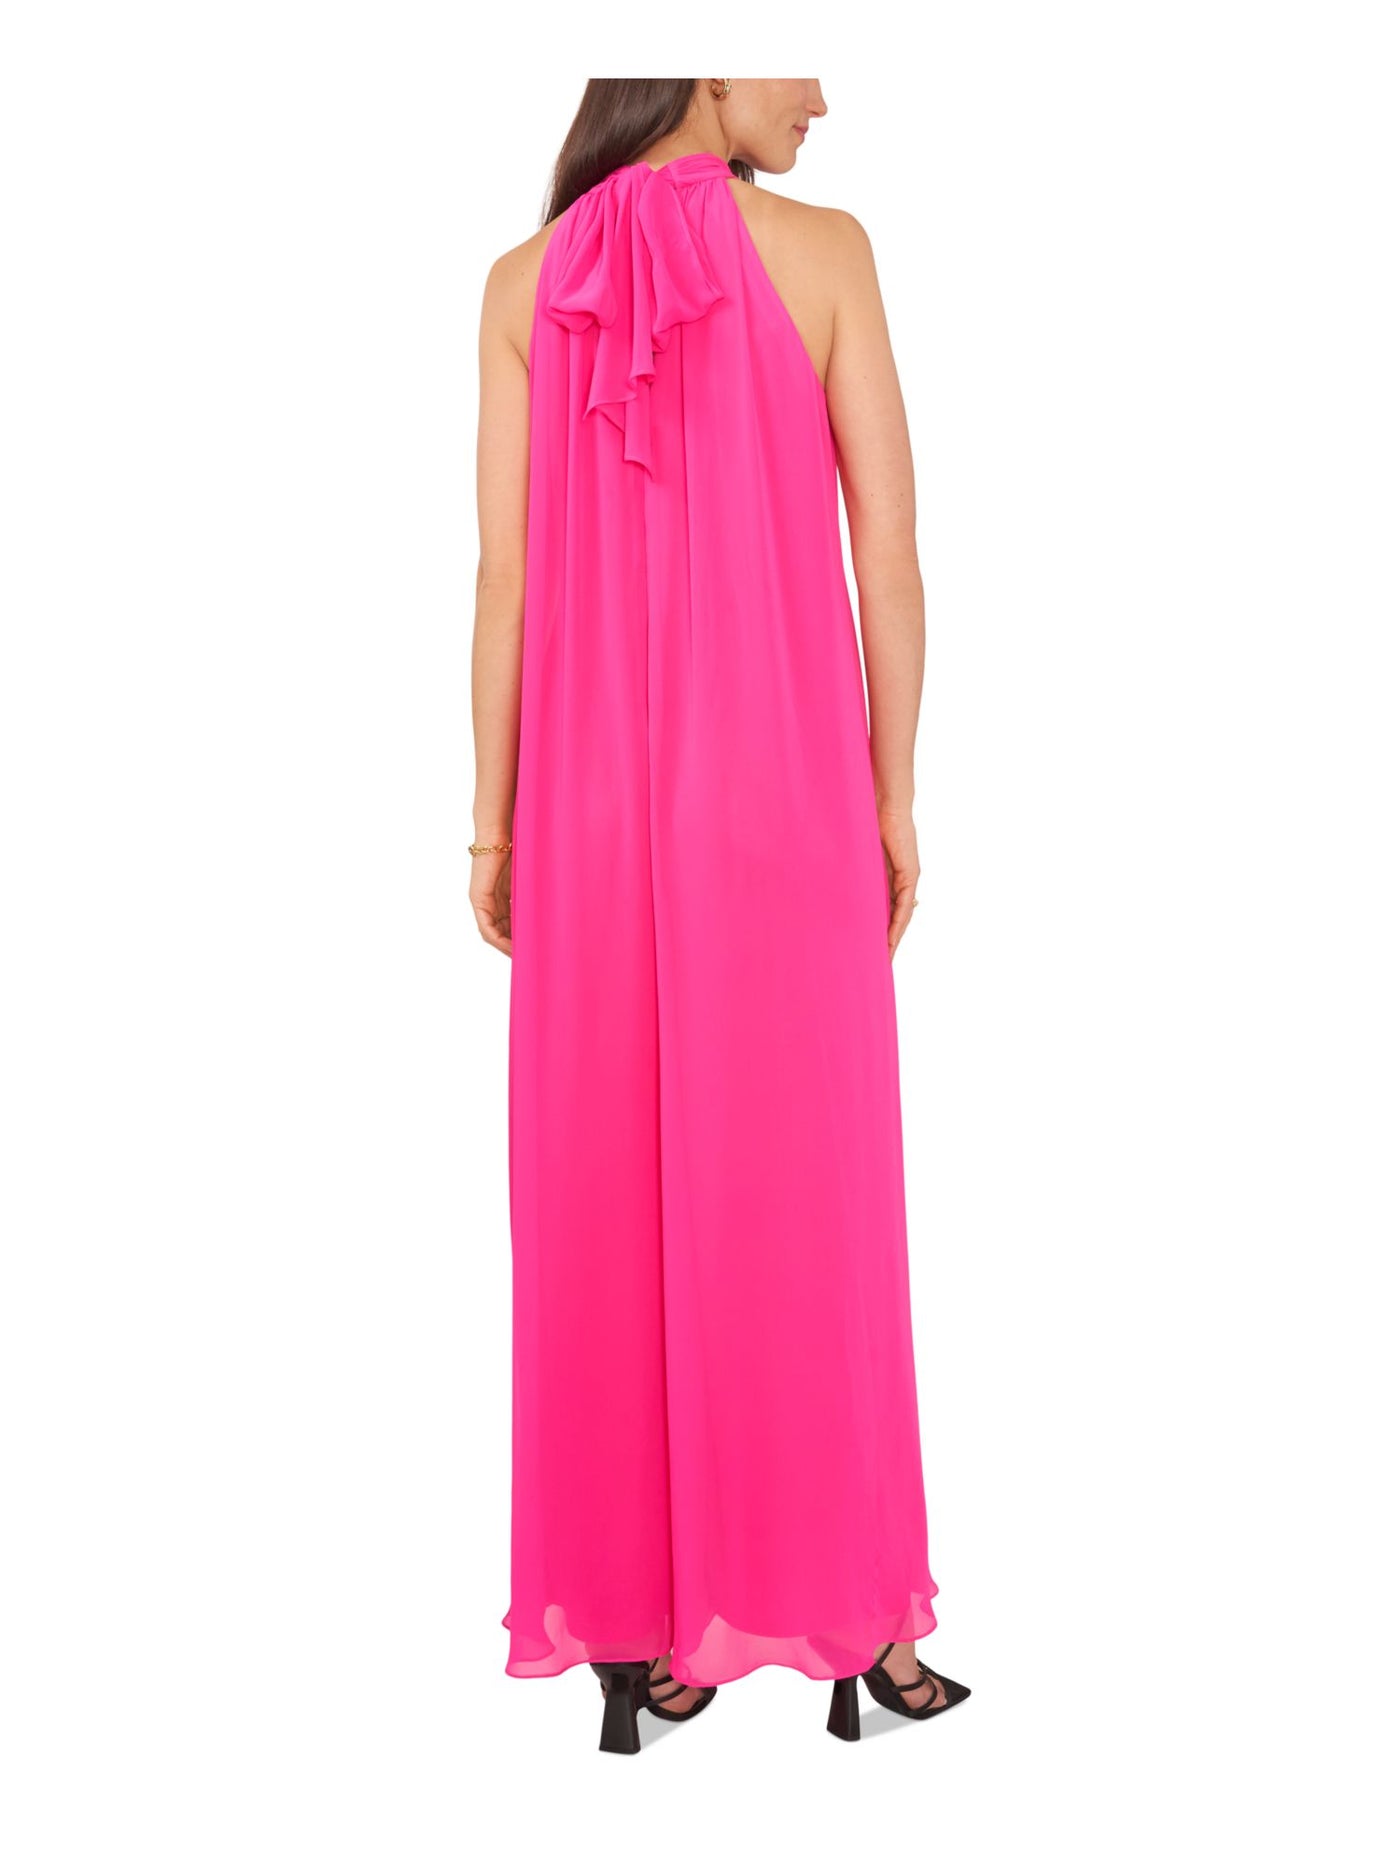 VINCE CAMUTO Womens Pink Zippered Tie Lined Sheer Sleeveless Halter Evening Wide Leg Jumpsuit XS